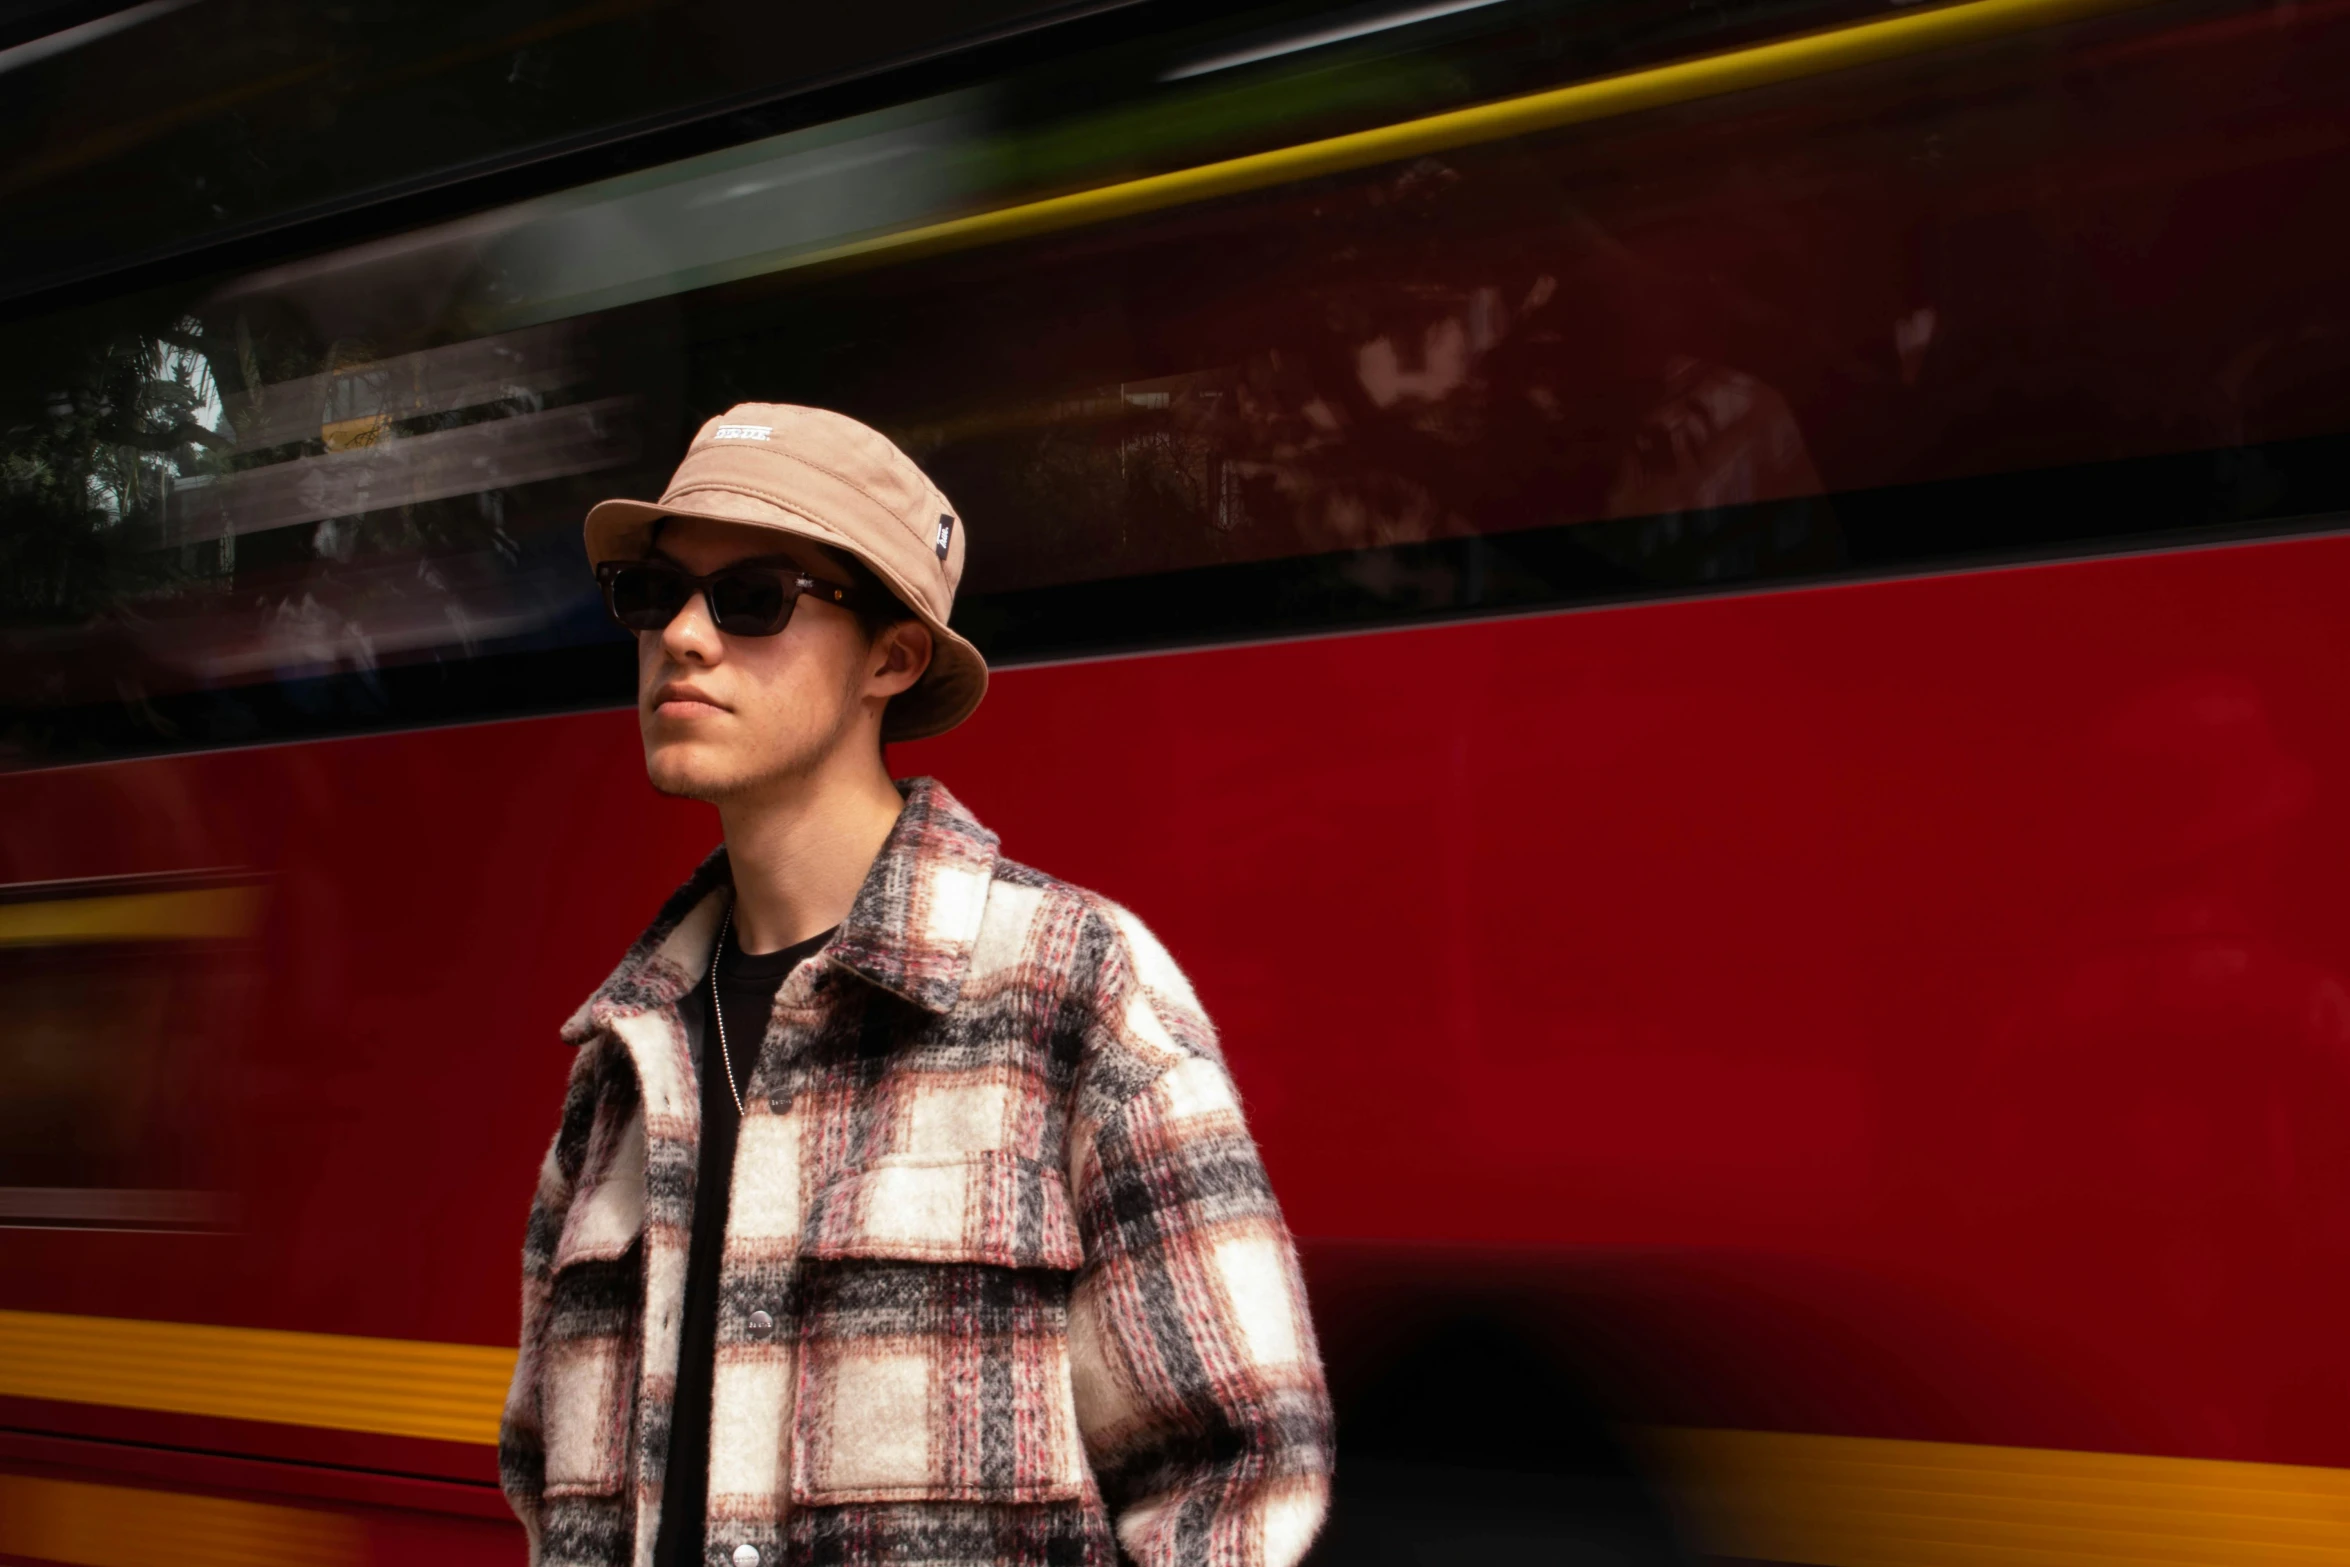 man wearing sunglasses and hat waiting at a bus stop